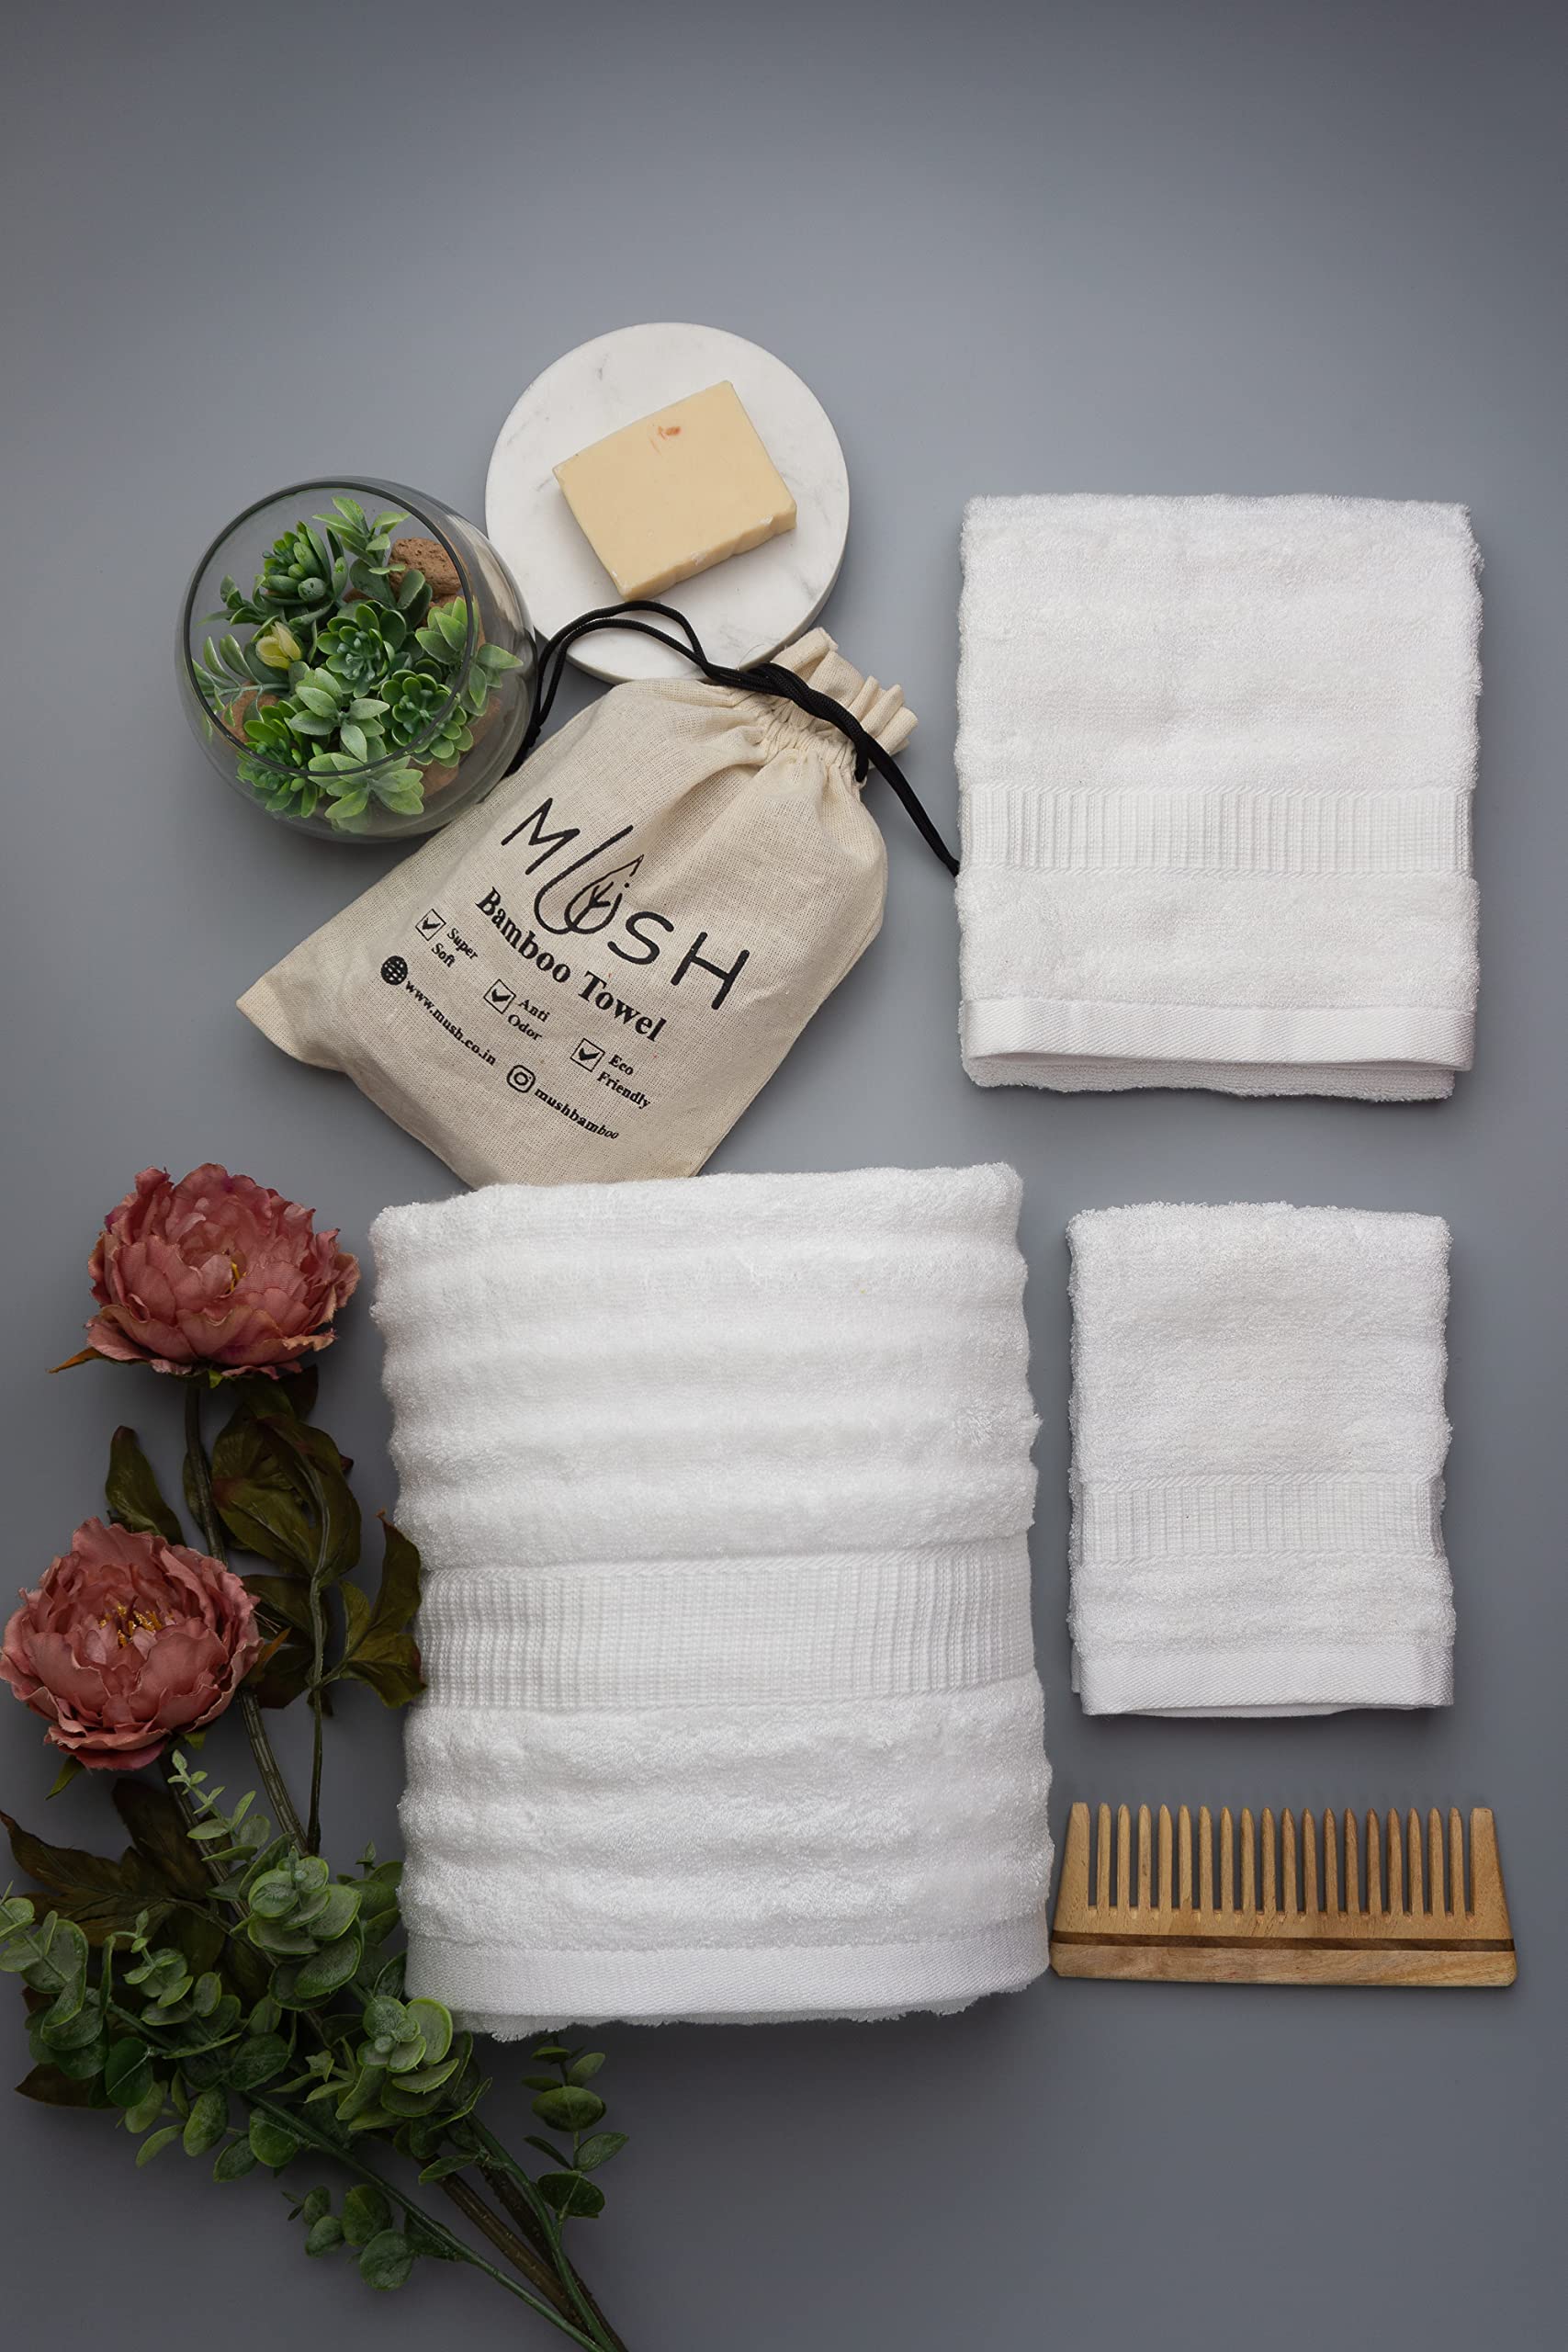 Mush Bamboo Towels for Bath Large Size | 600 GSM Bath Towel for Men & Women | Soft, Highly Absorbent, Quick Dry,and Anti Microbial | 75 X 150 cms (Pack of 1, White)